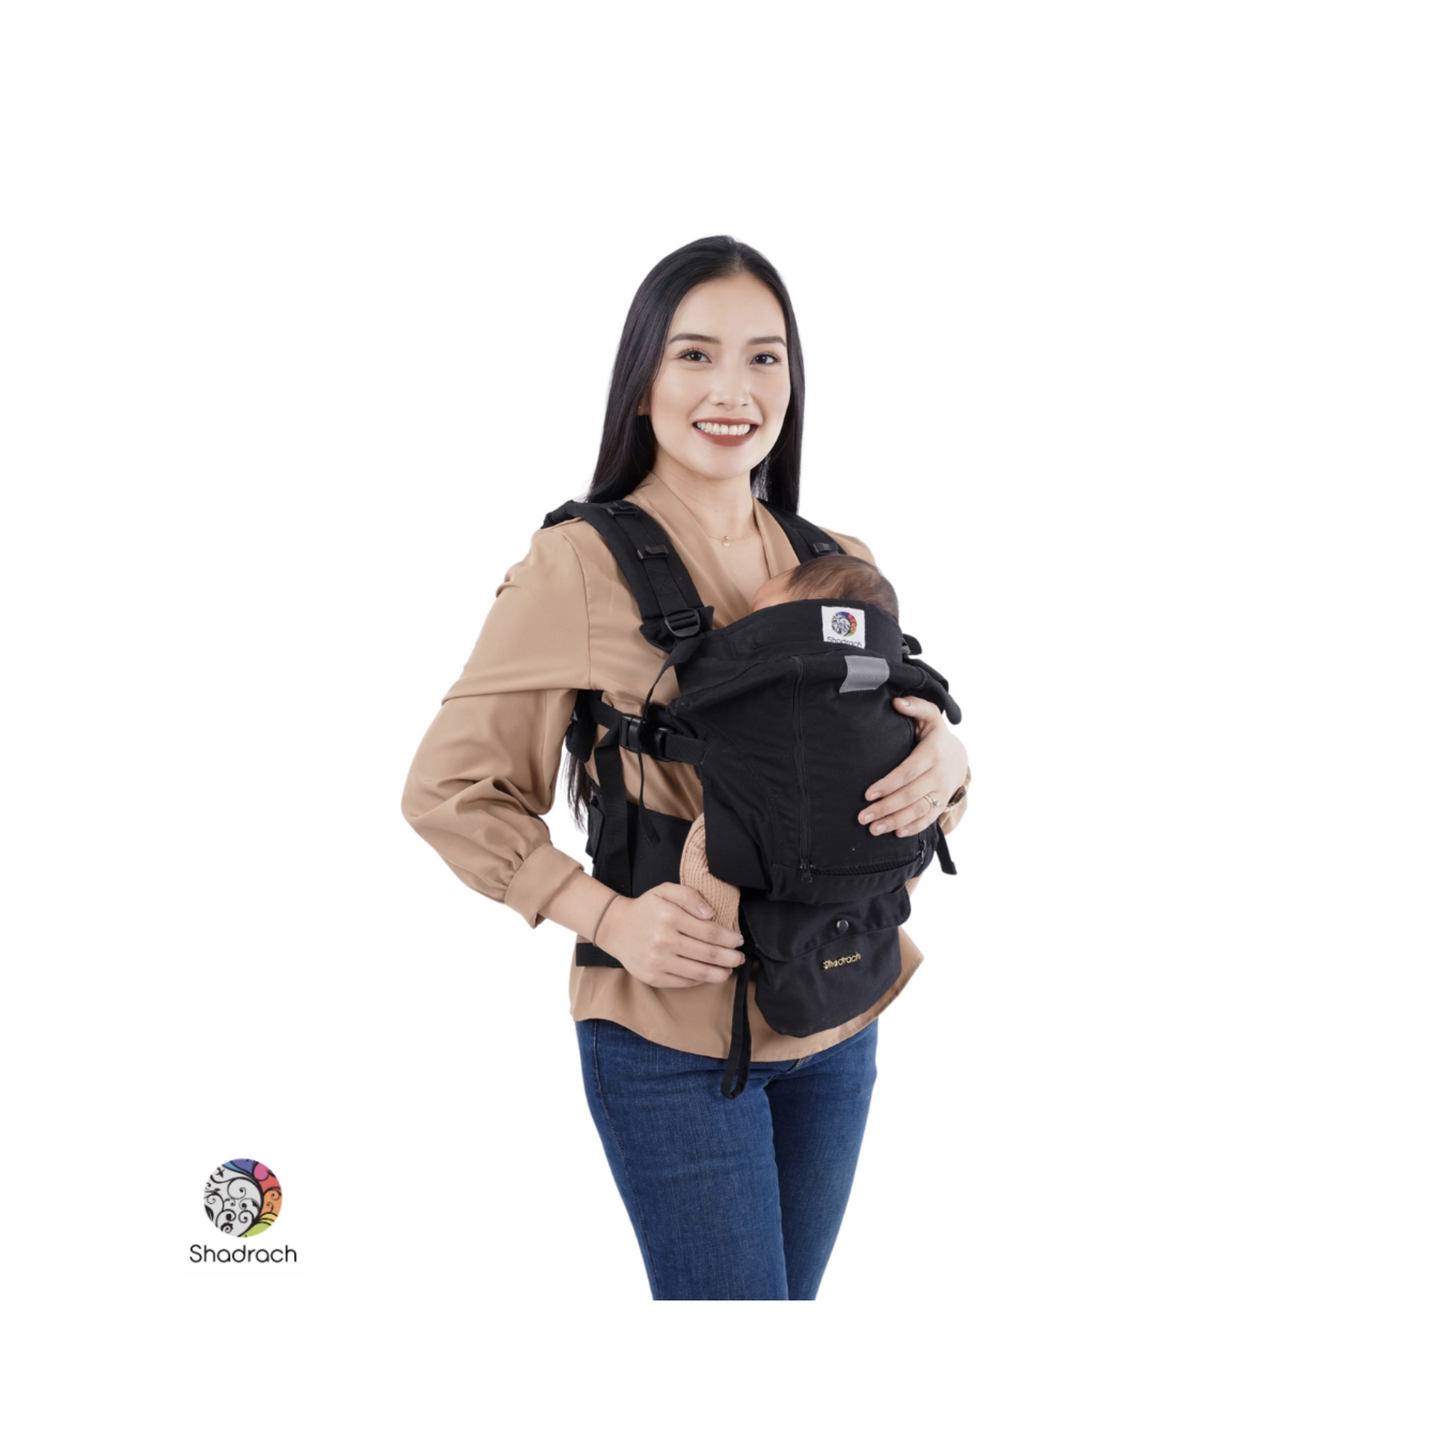 Shadrach Grow With Me Ergonomic Baby Carrier Black (Newborns to Toddlers)